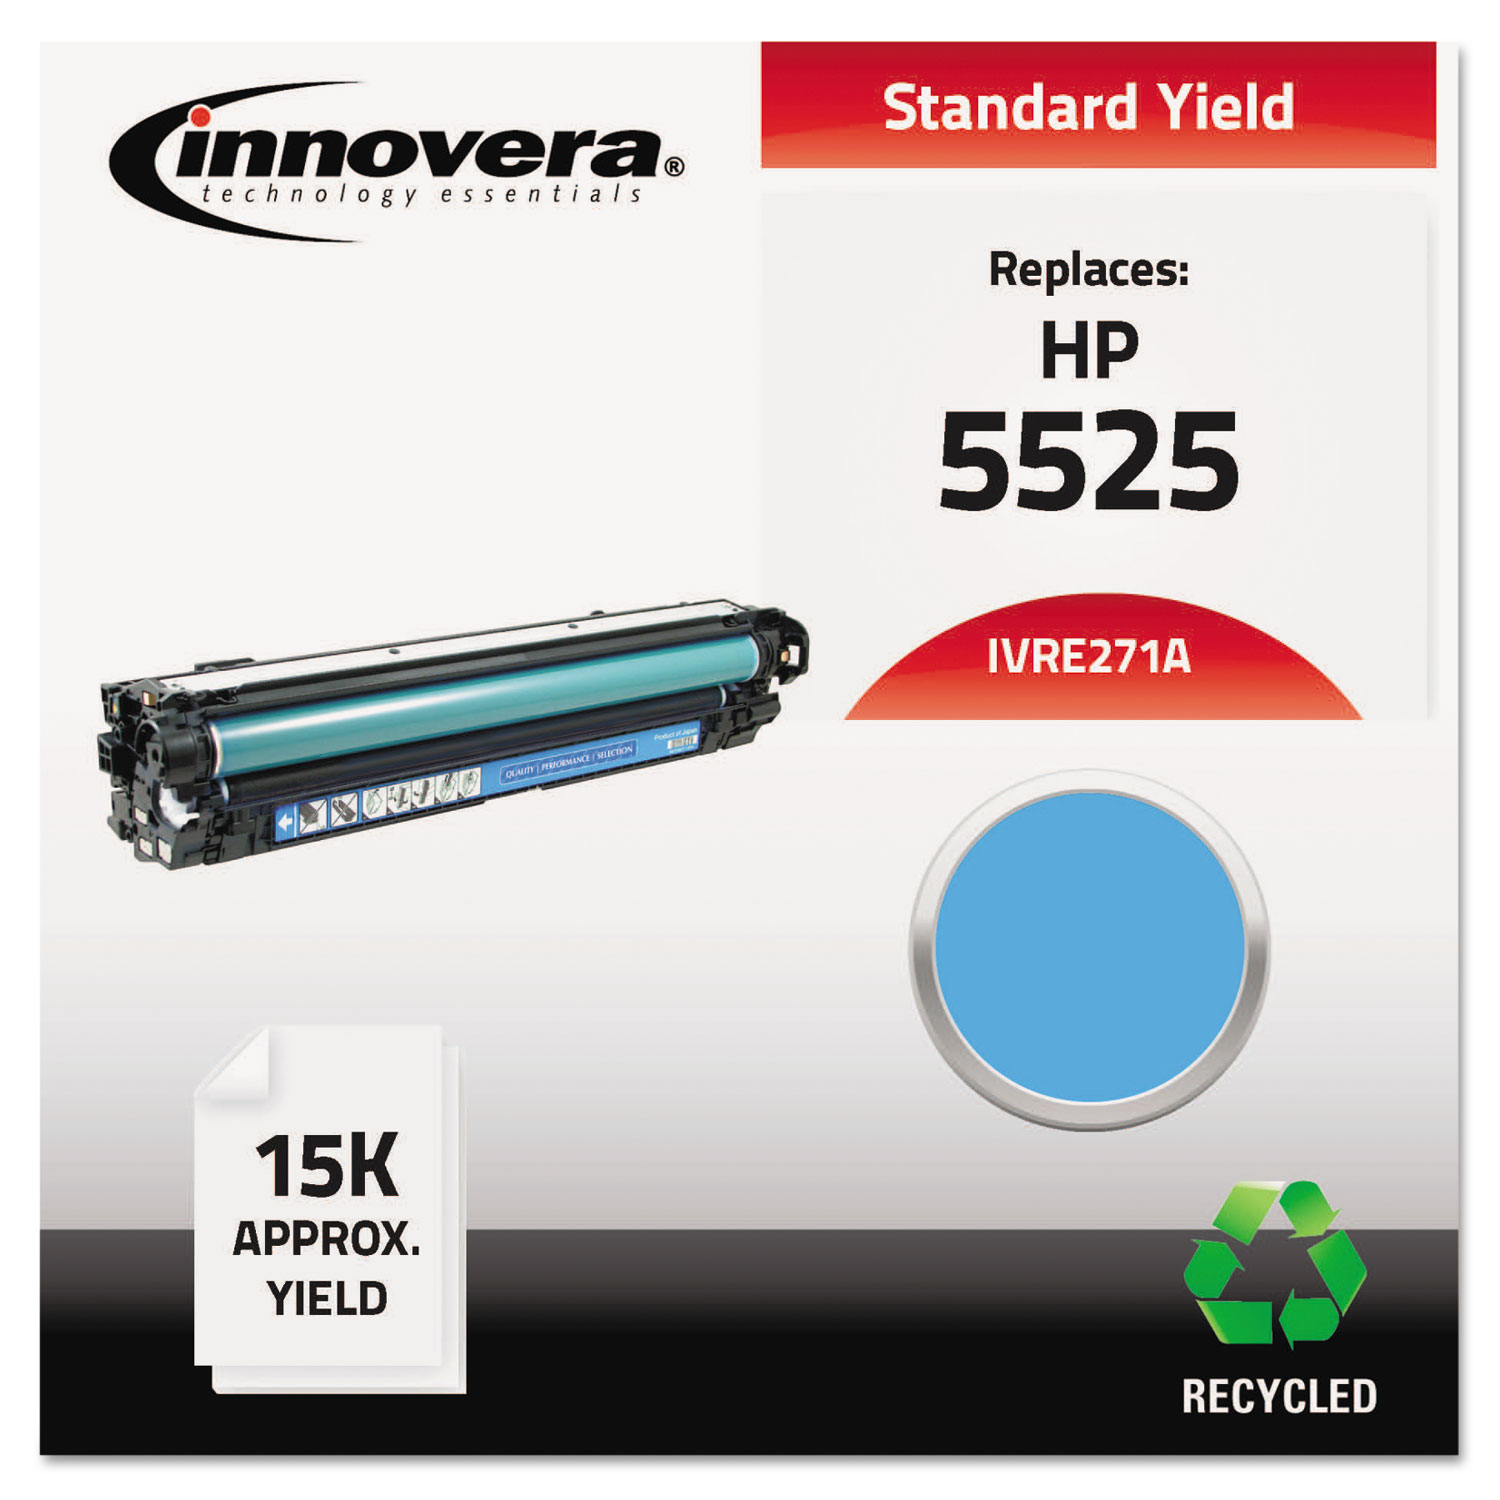  Innovera IVRE271A Remanufactured CE271A (650A) Toner, 15000 Page-Yield, Cyan (IVRE271A) 